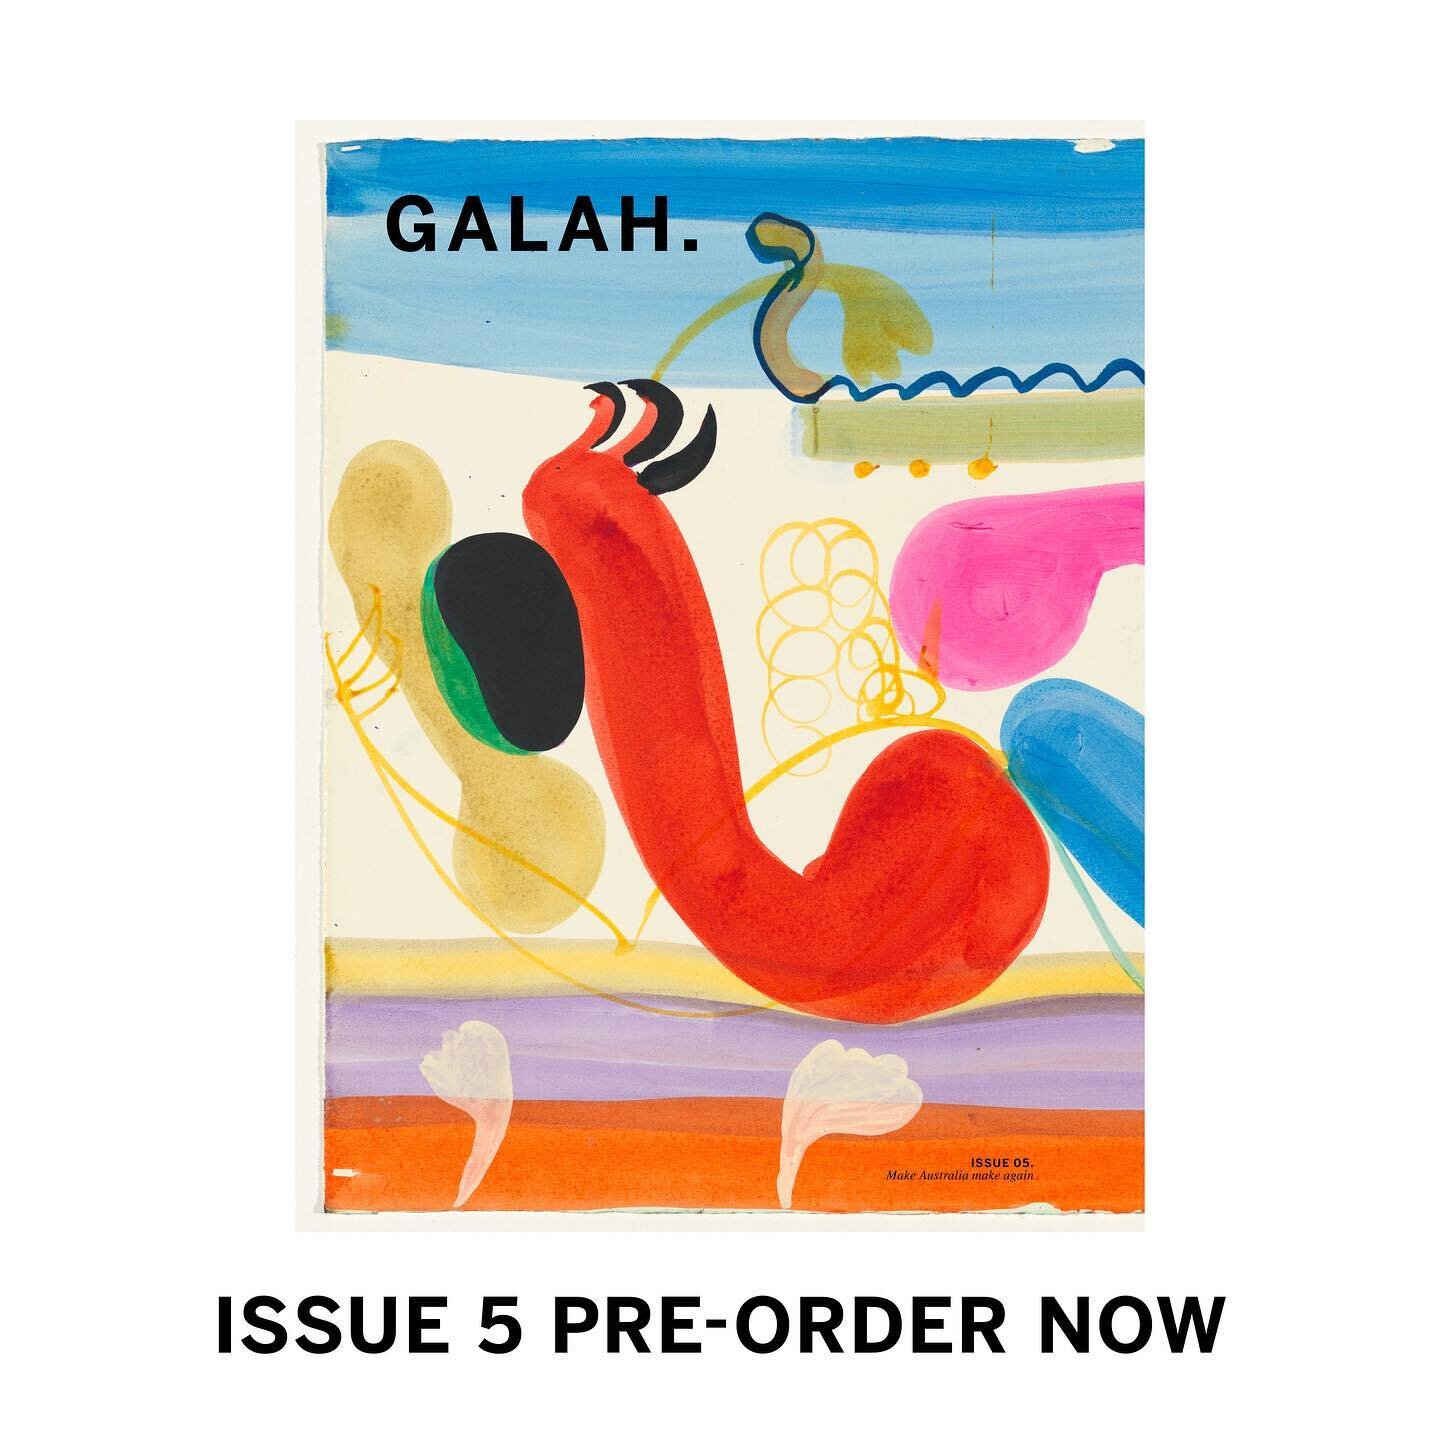 Another issue of Galah is coming out into this world, and it&rsquo;s cover is pure joy. 
Pre-order now.
@galah.press 
The cover image is part of an untitled painting by Arthur Boyd.